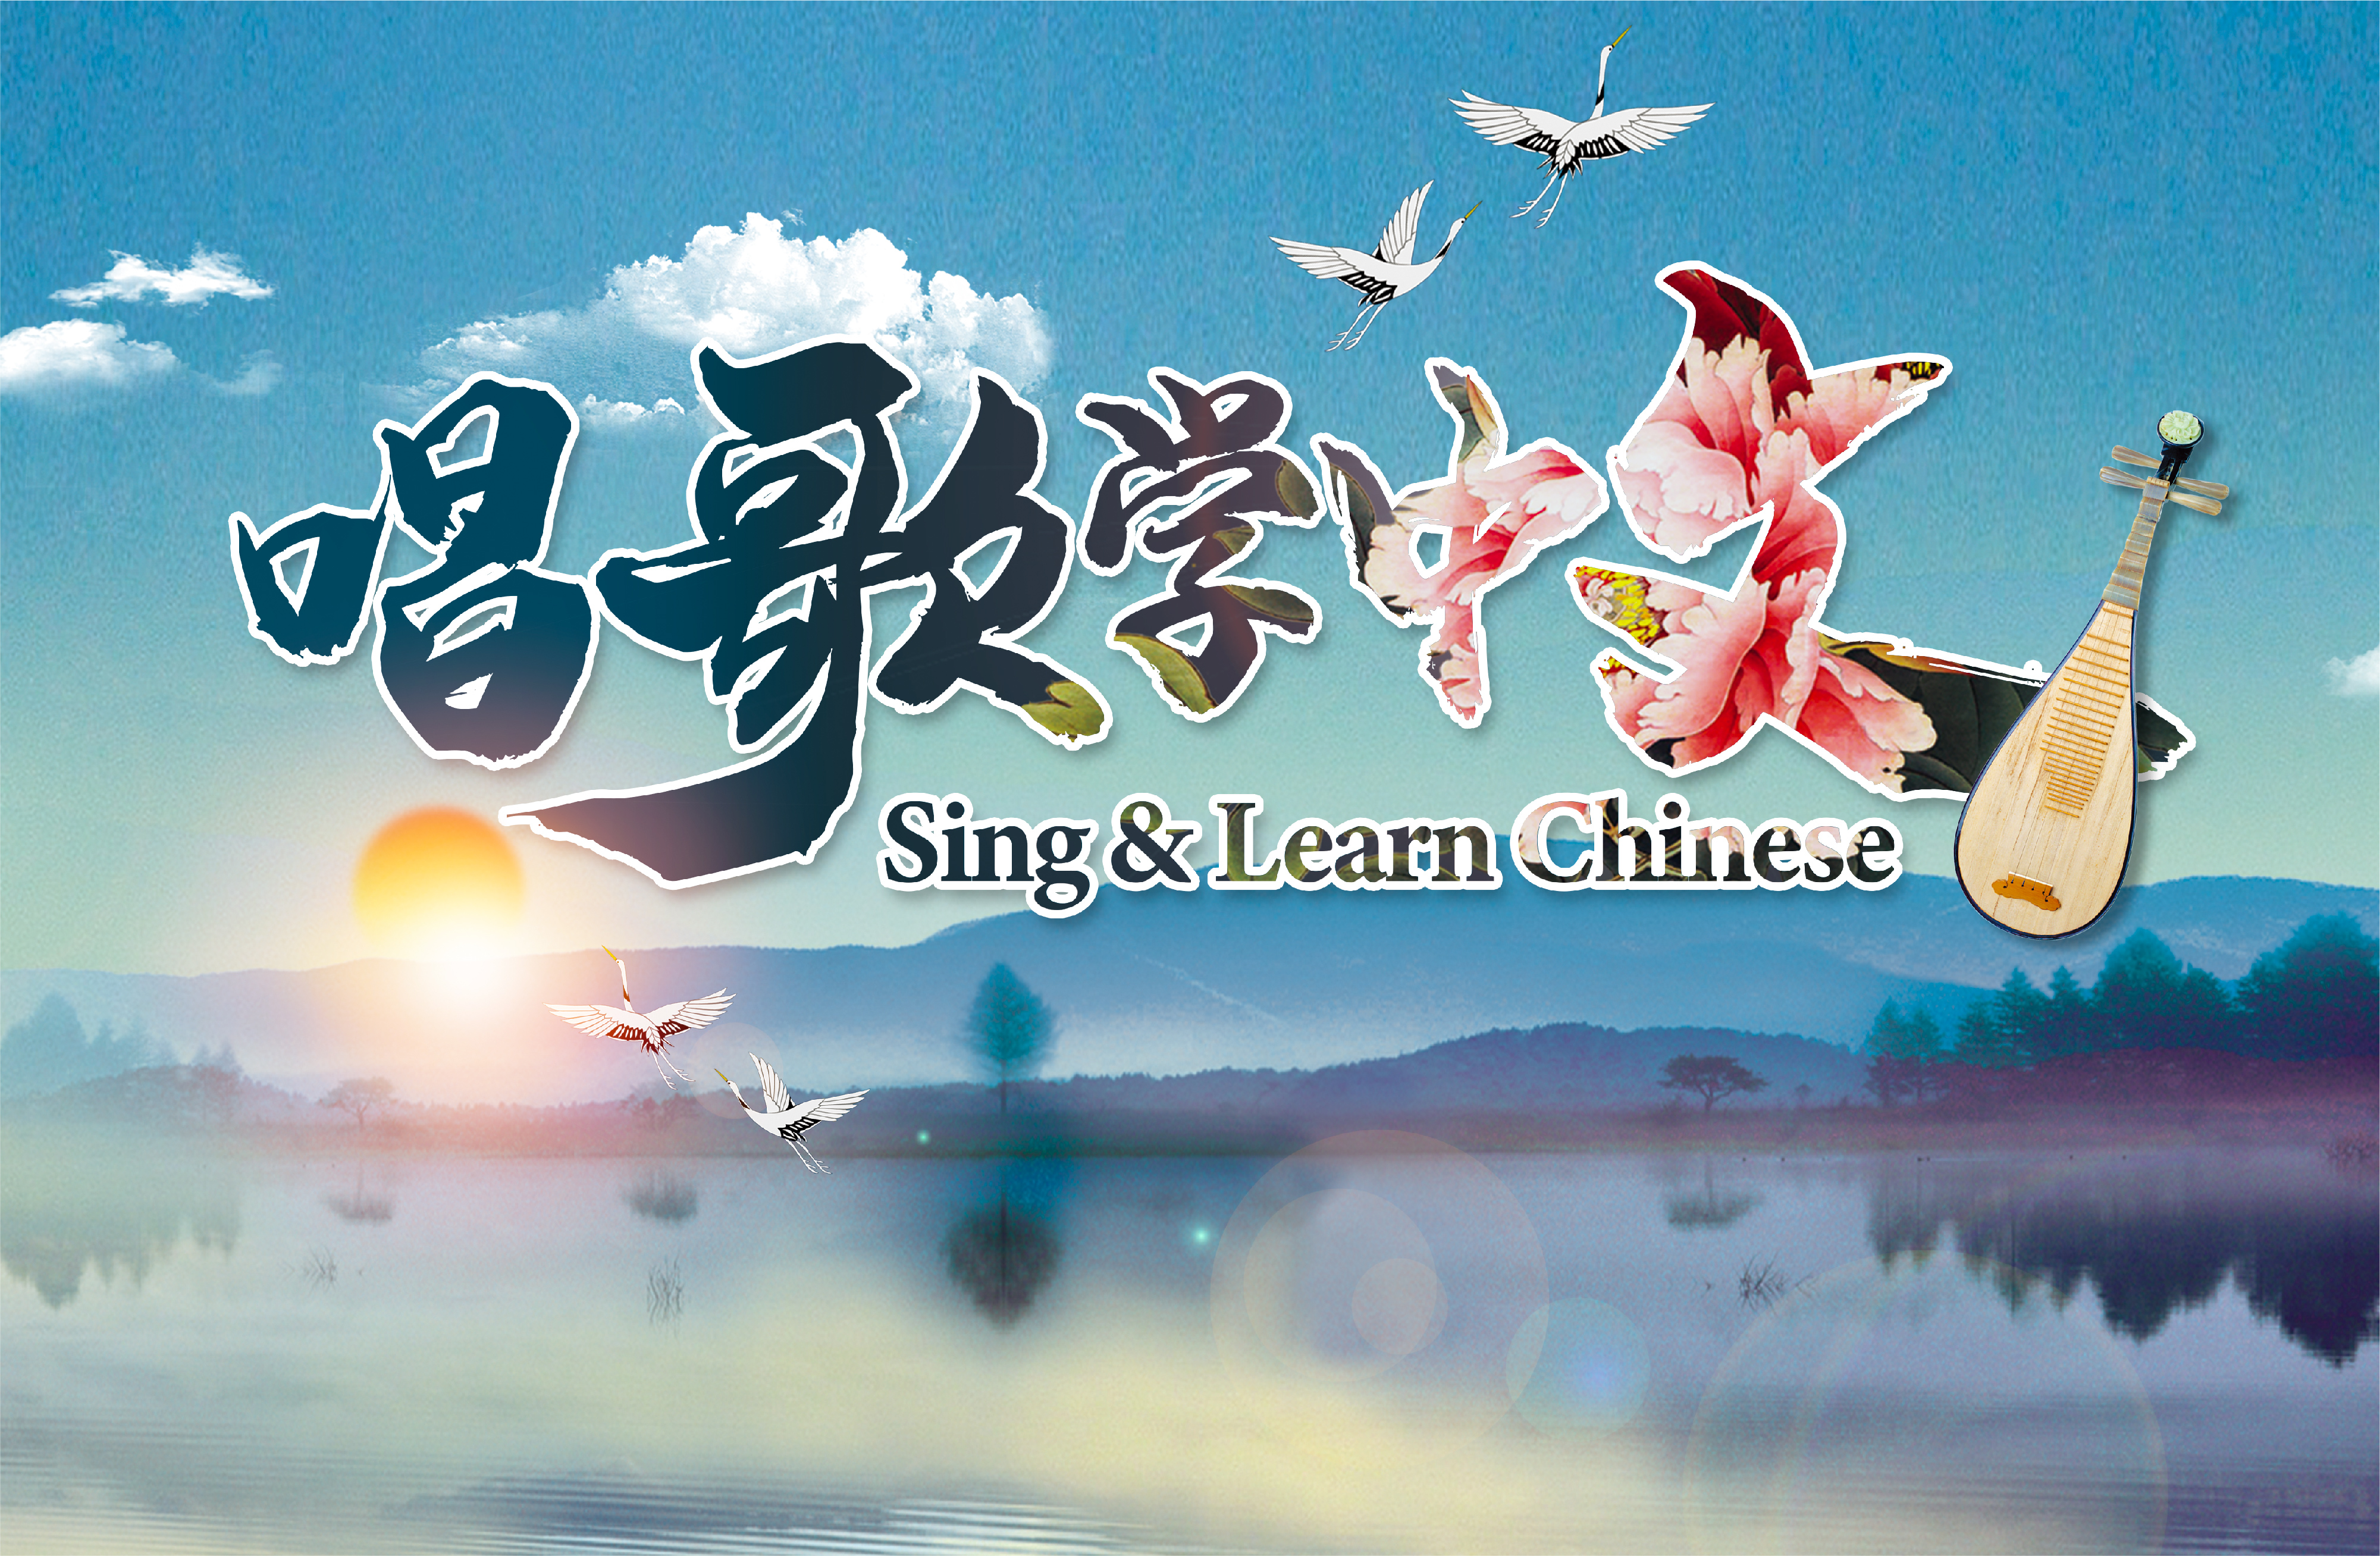 Sing&Learn Chinese